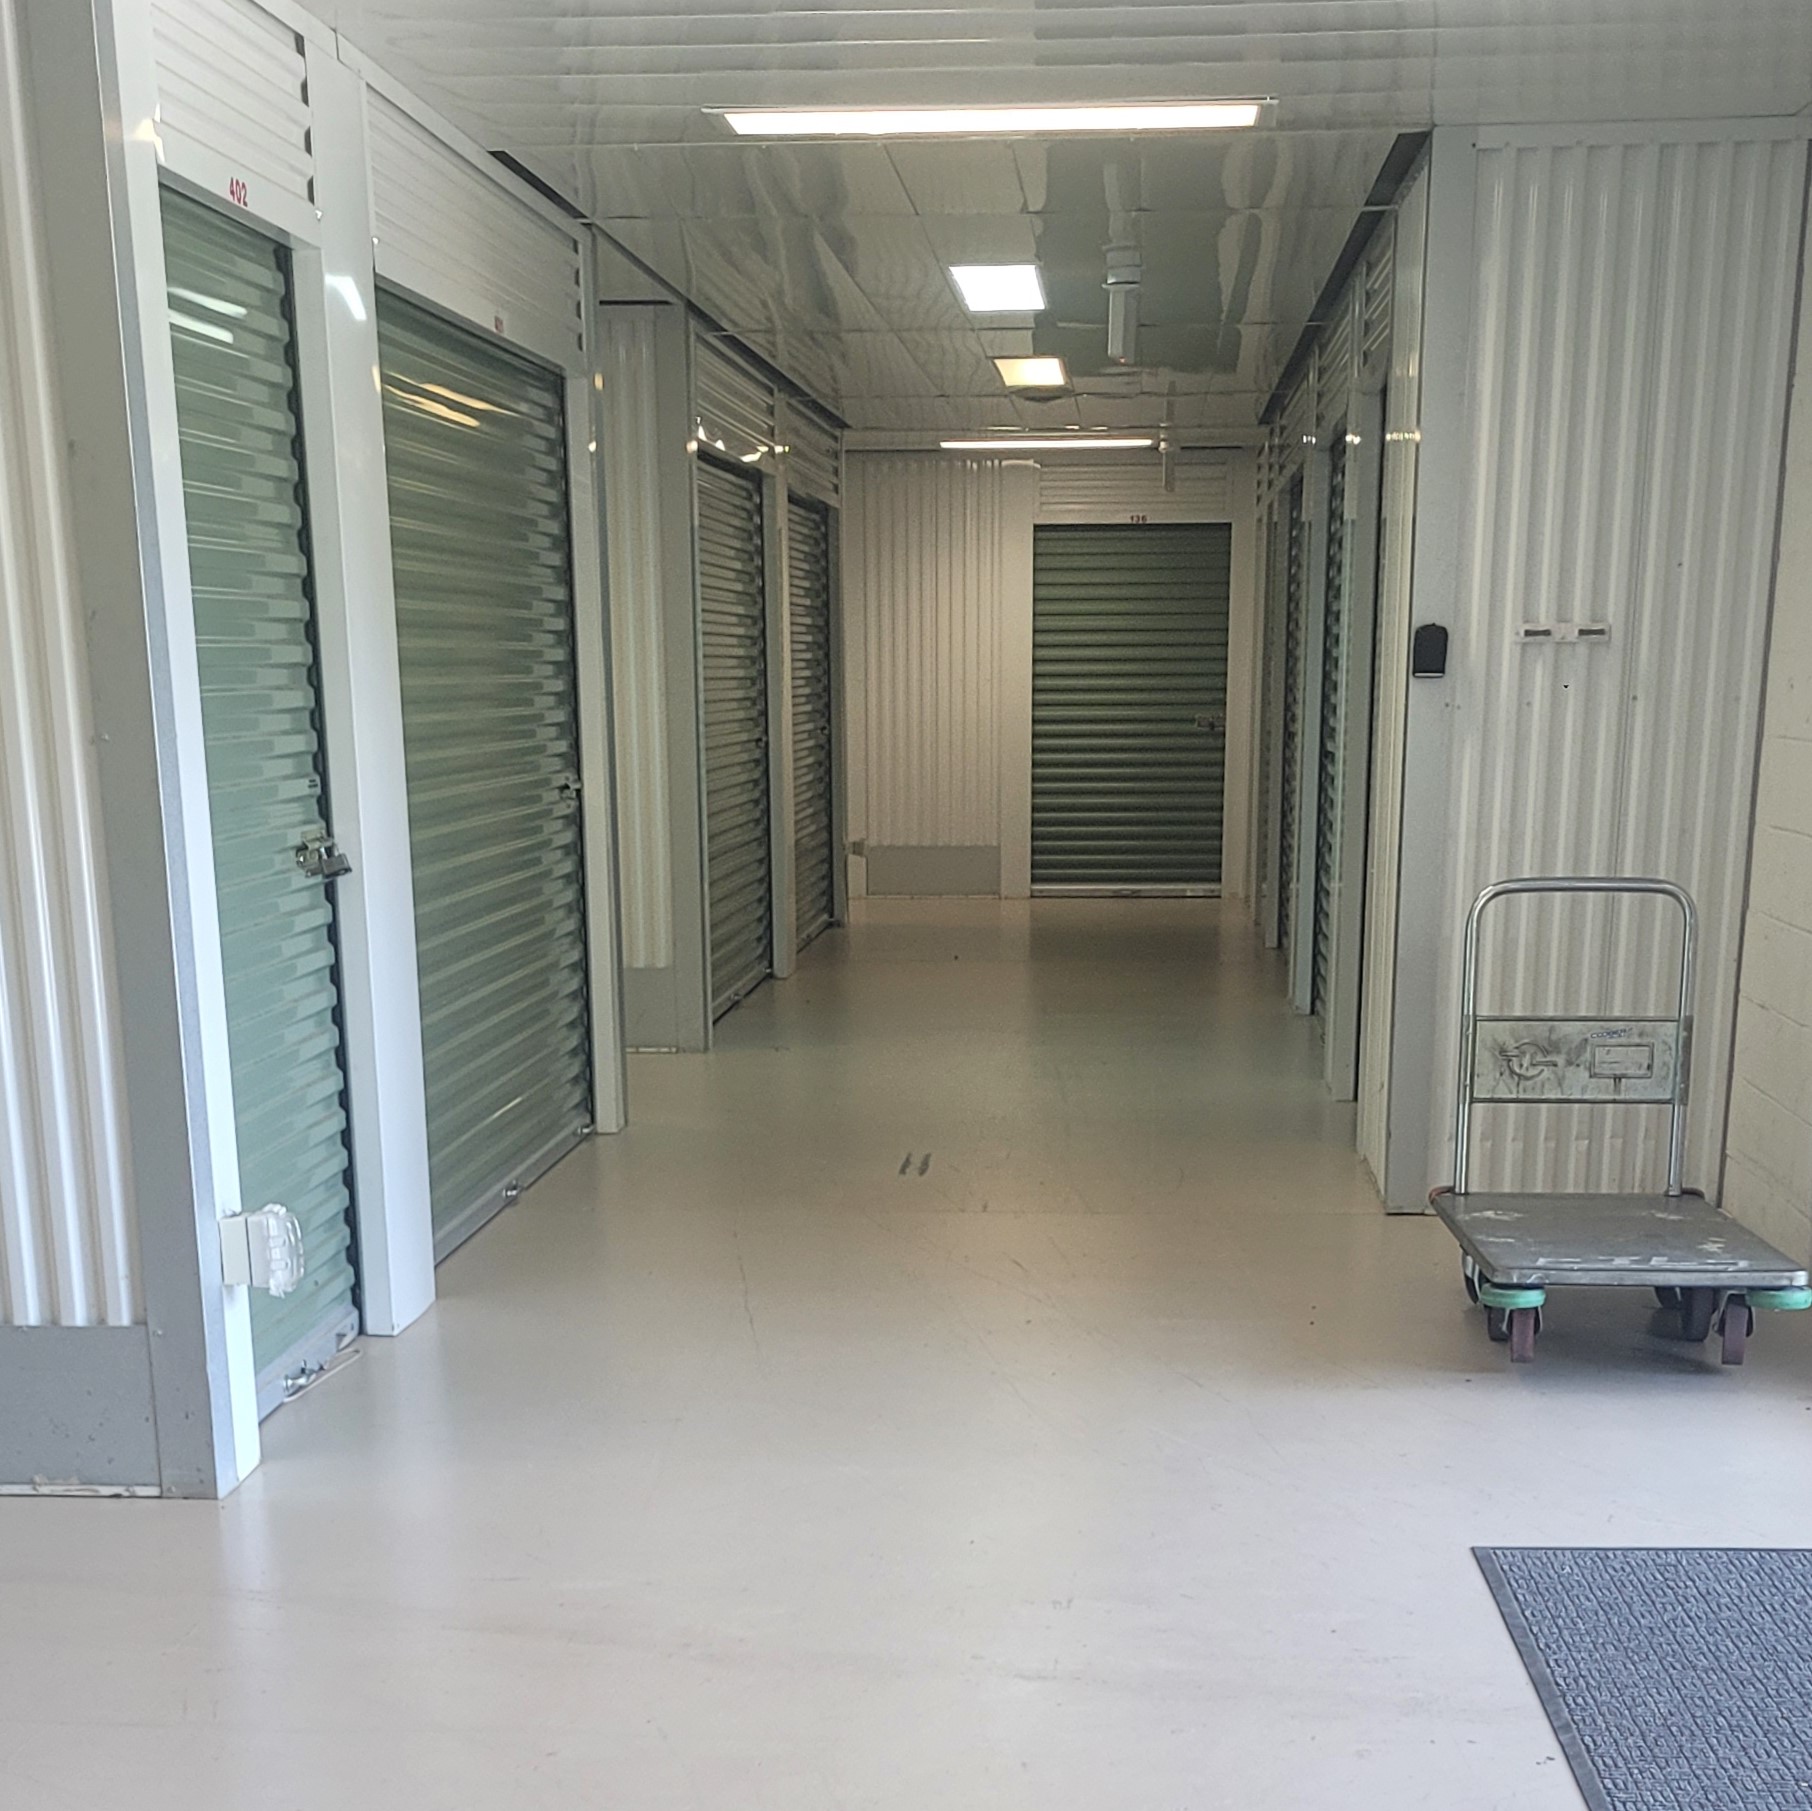 White Oak Self Storage is an affordable and clean storage facility